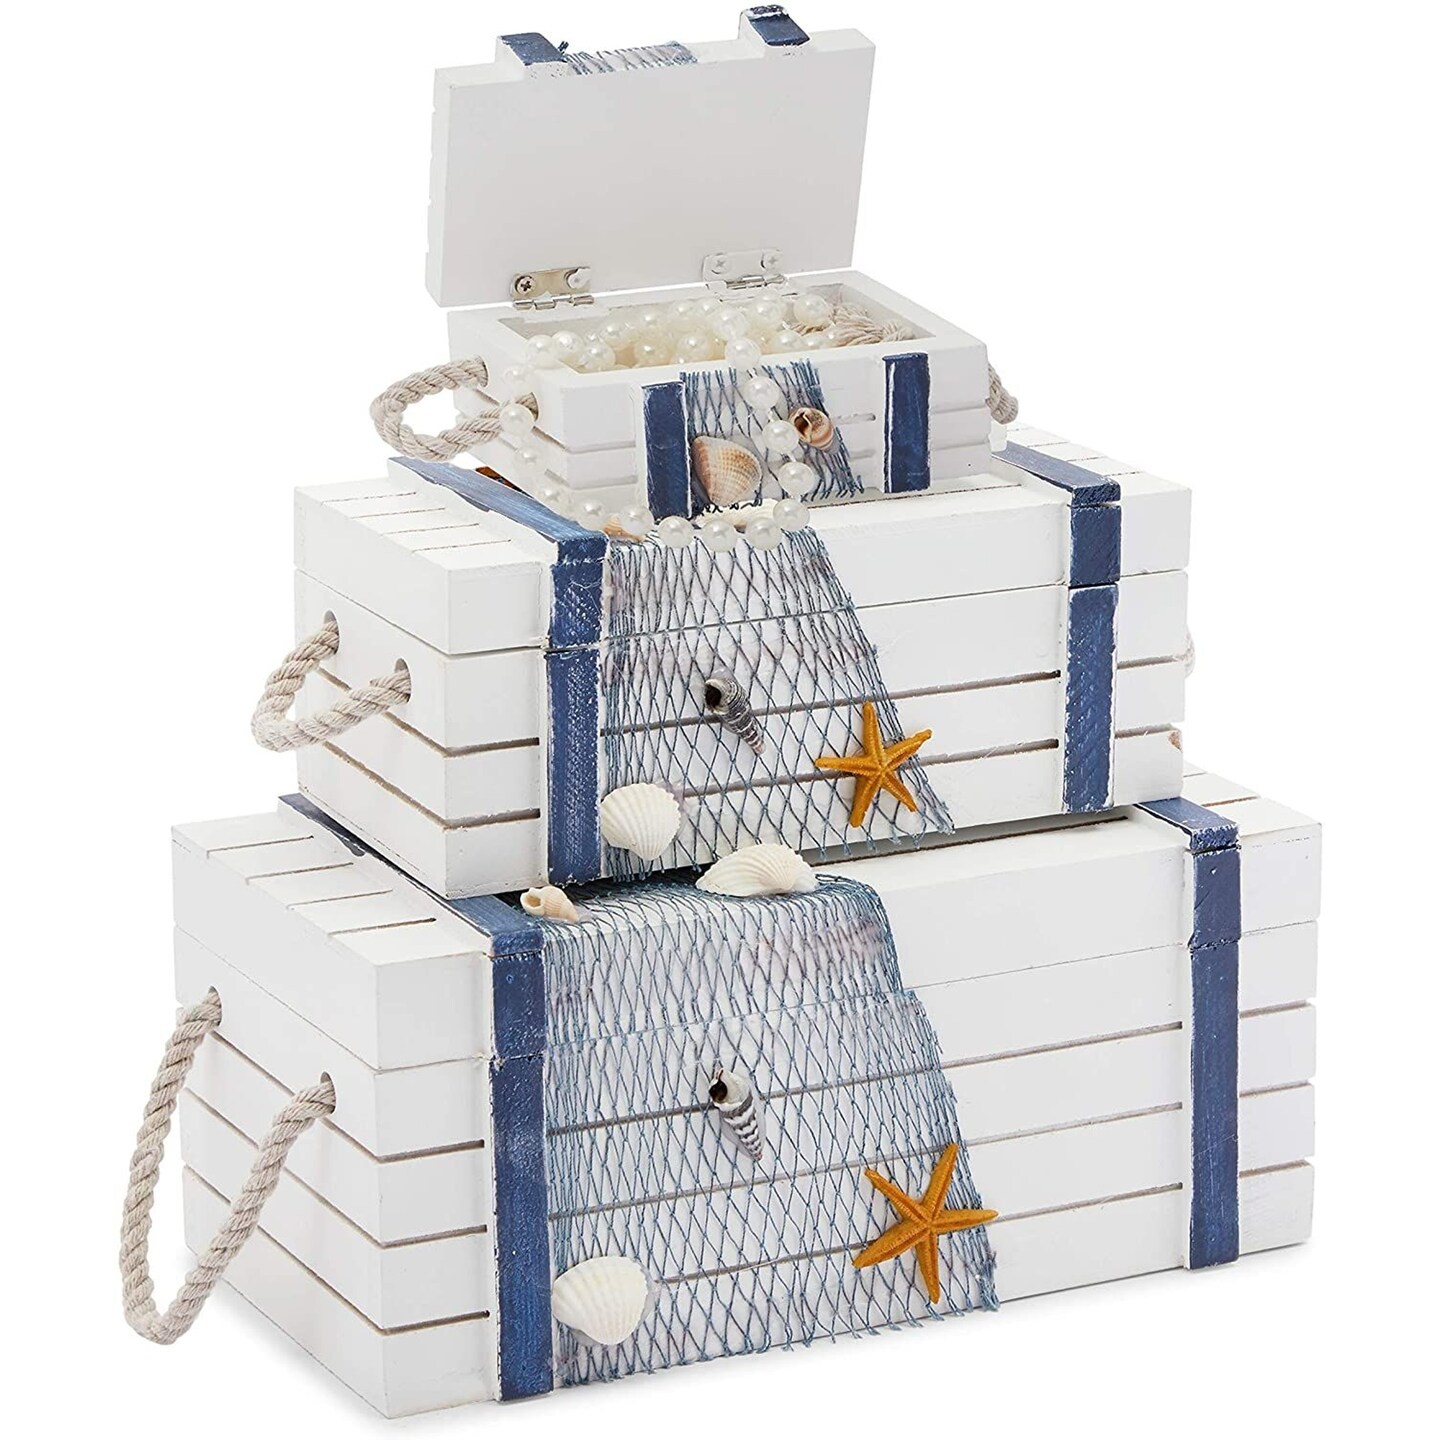 Wooden Jewelry Boxes, Nautical and Beach Decor in 3 Sizes (3 Pieces)